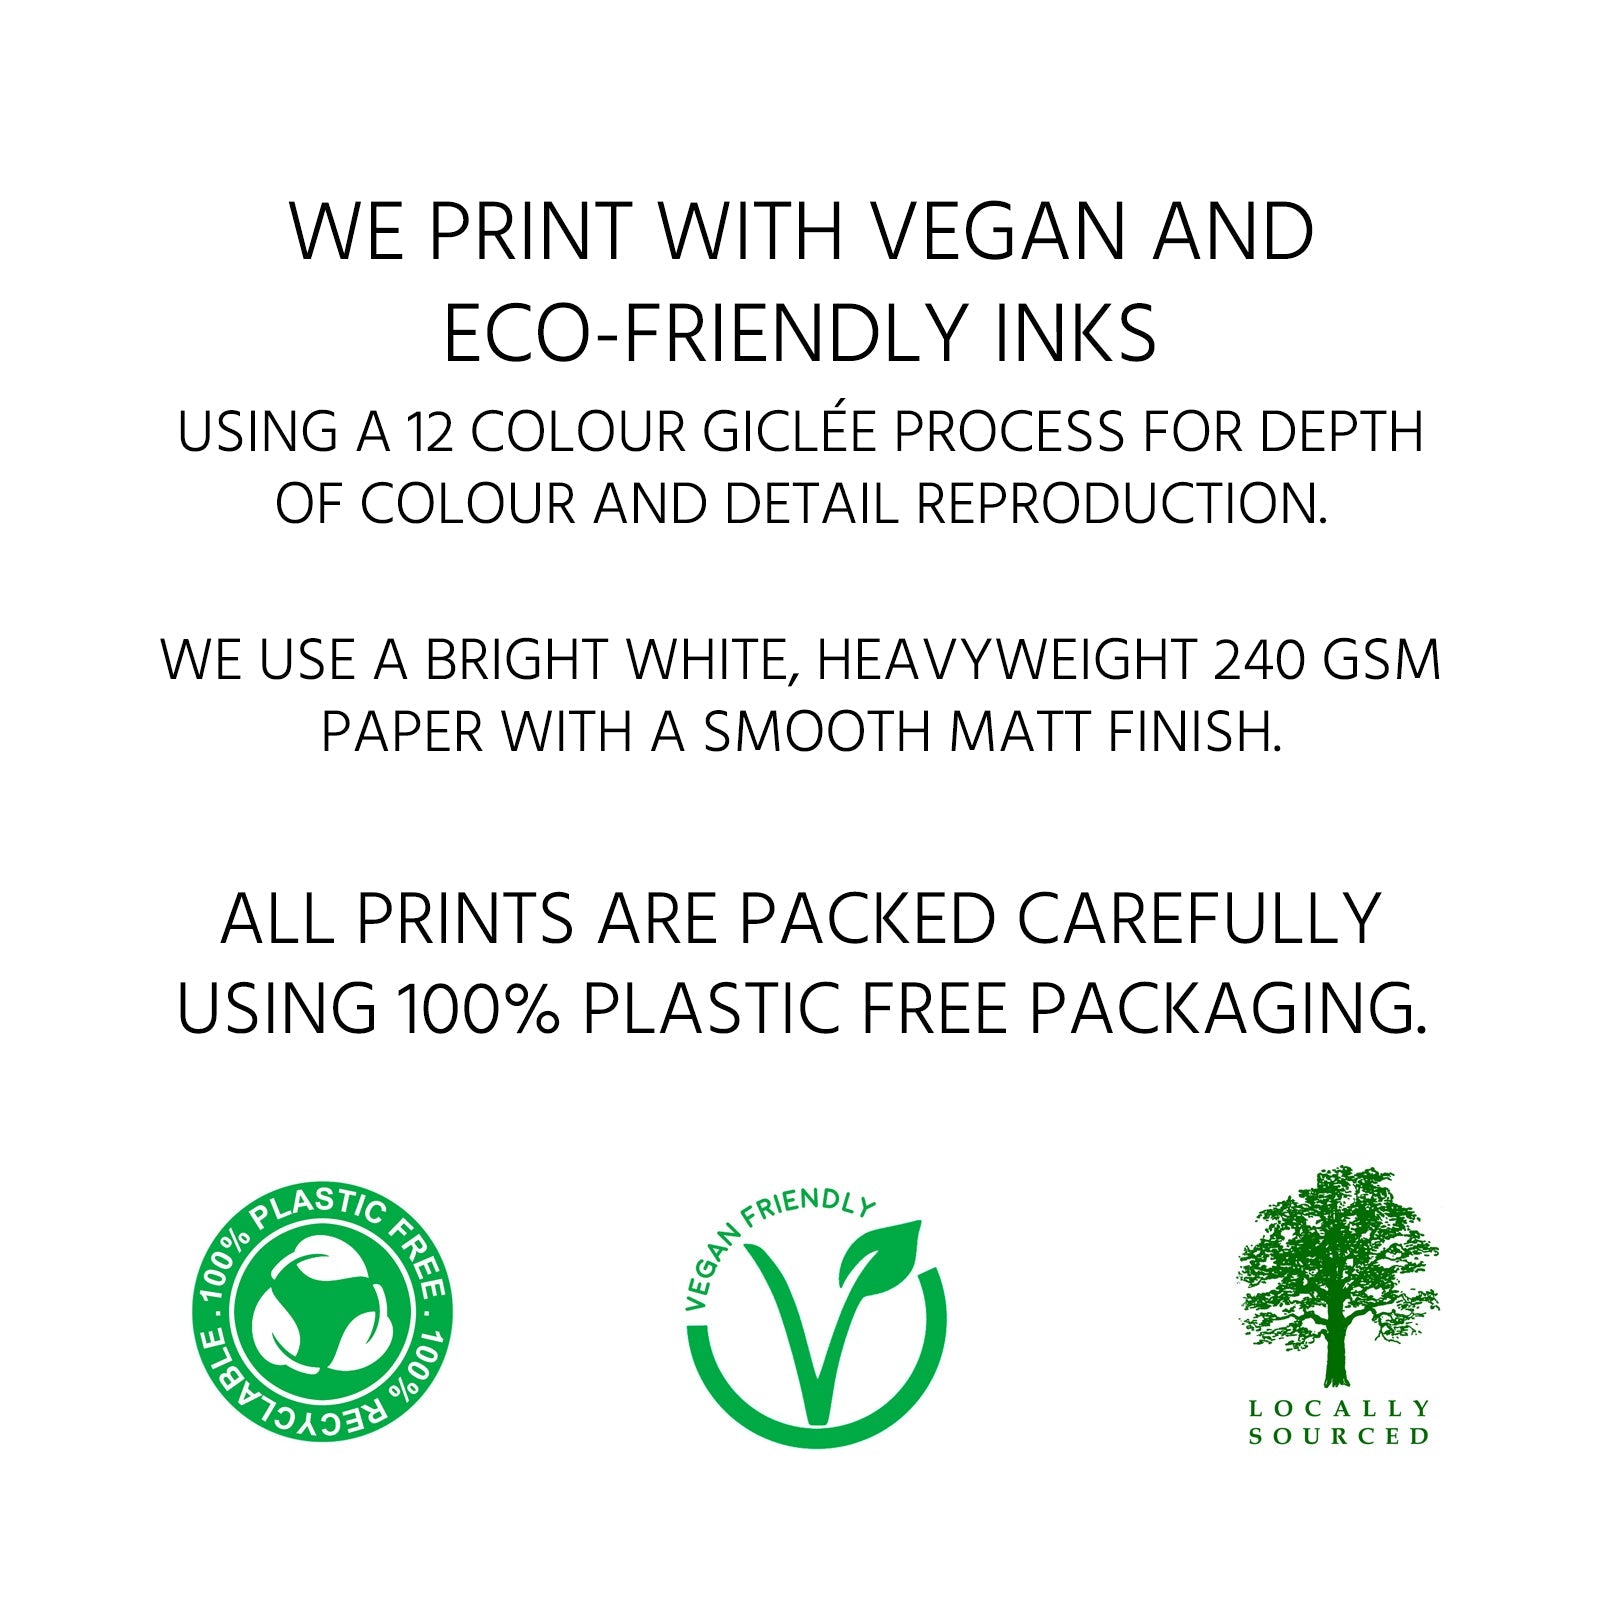 We print with vegan and eco-friendly inks using a 12 colour giclée process for depth of colour and detail reproduction. We use a bright white, heavyweight 240 gsm paper with a smooth matt finish. All prints are packed carefully using 100% plastic free packaging.